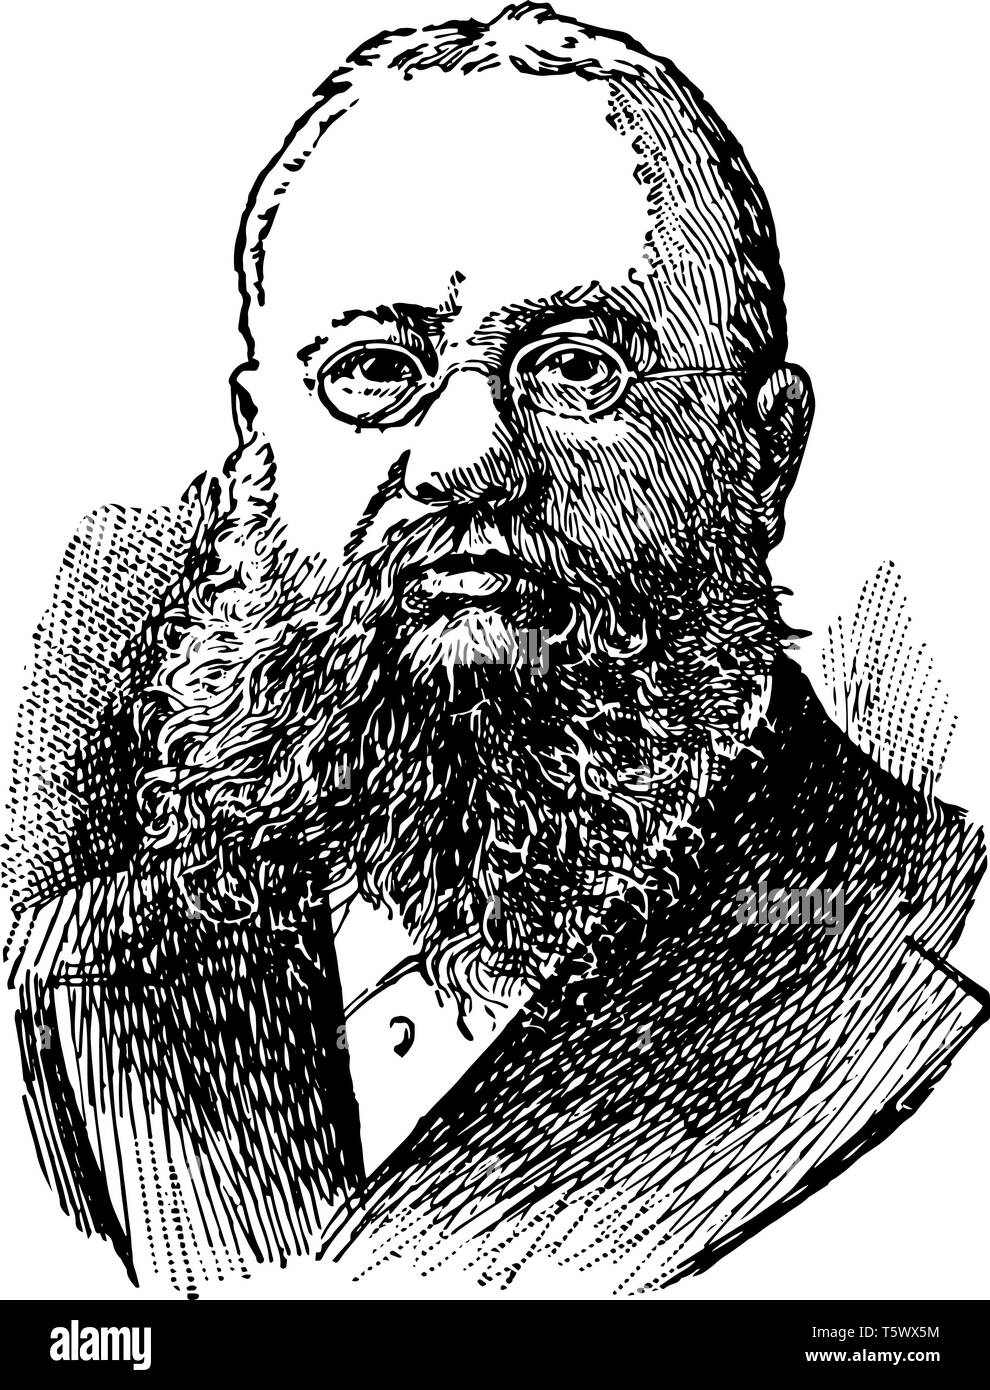 John Fiske 1842 to 1901 he was an American philosopher and historian who lectured across America lecturing on scientific philosophic historical though Stock Vector